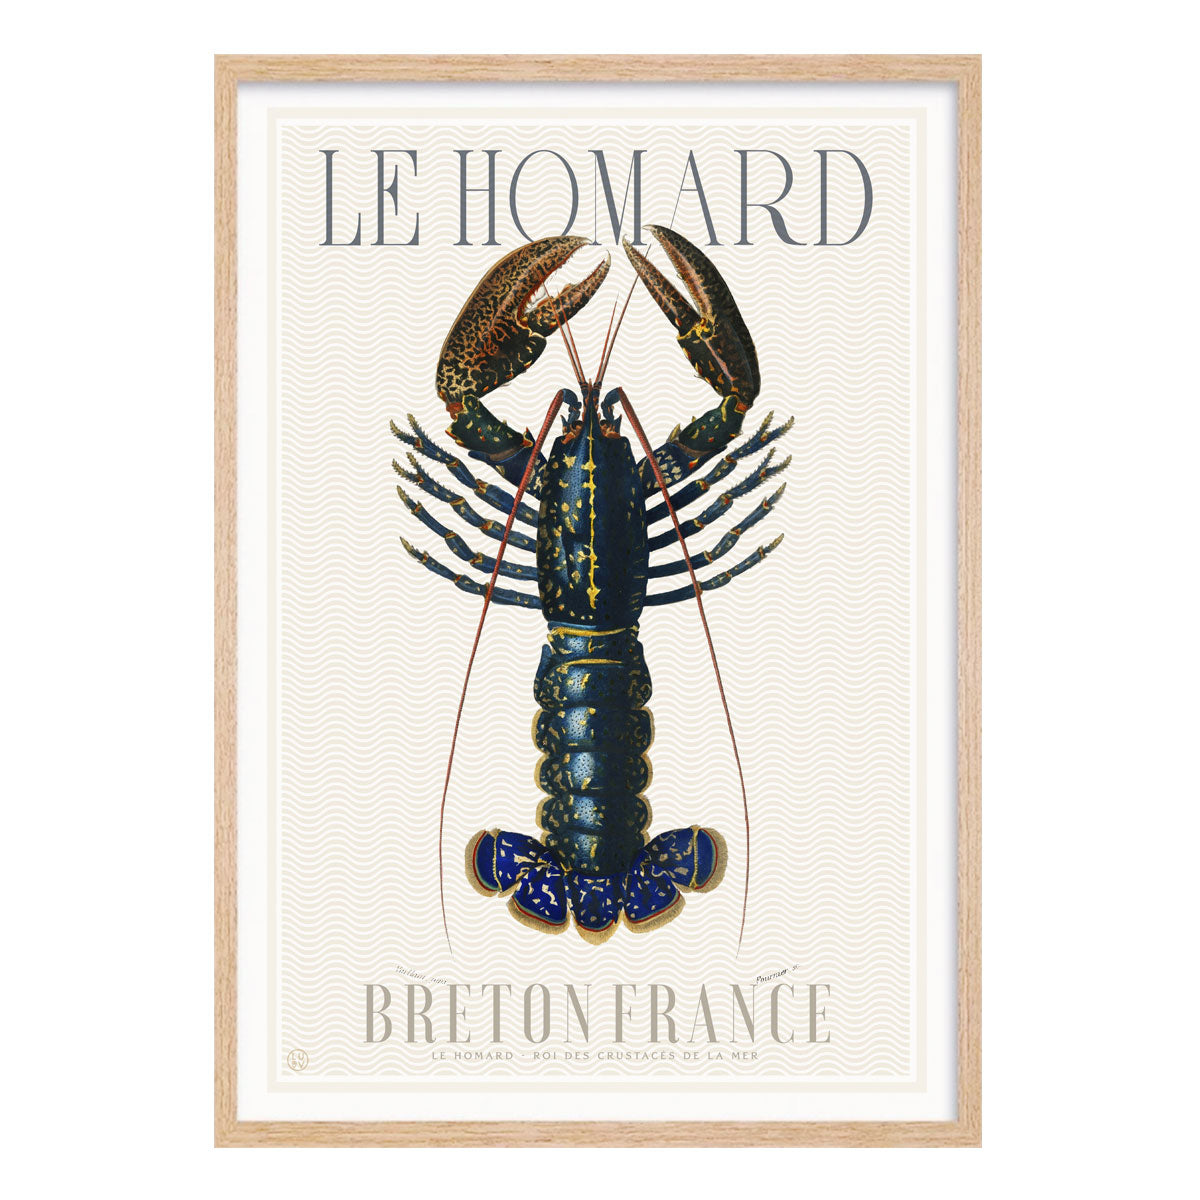 Le homard France retro vintage travel poster print in oak frame from Places We Luv